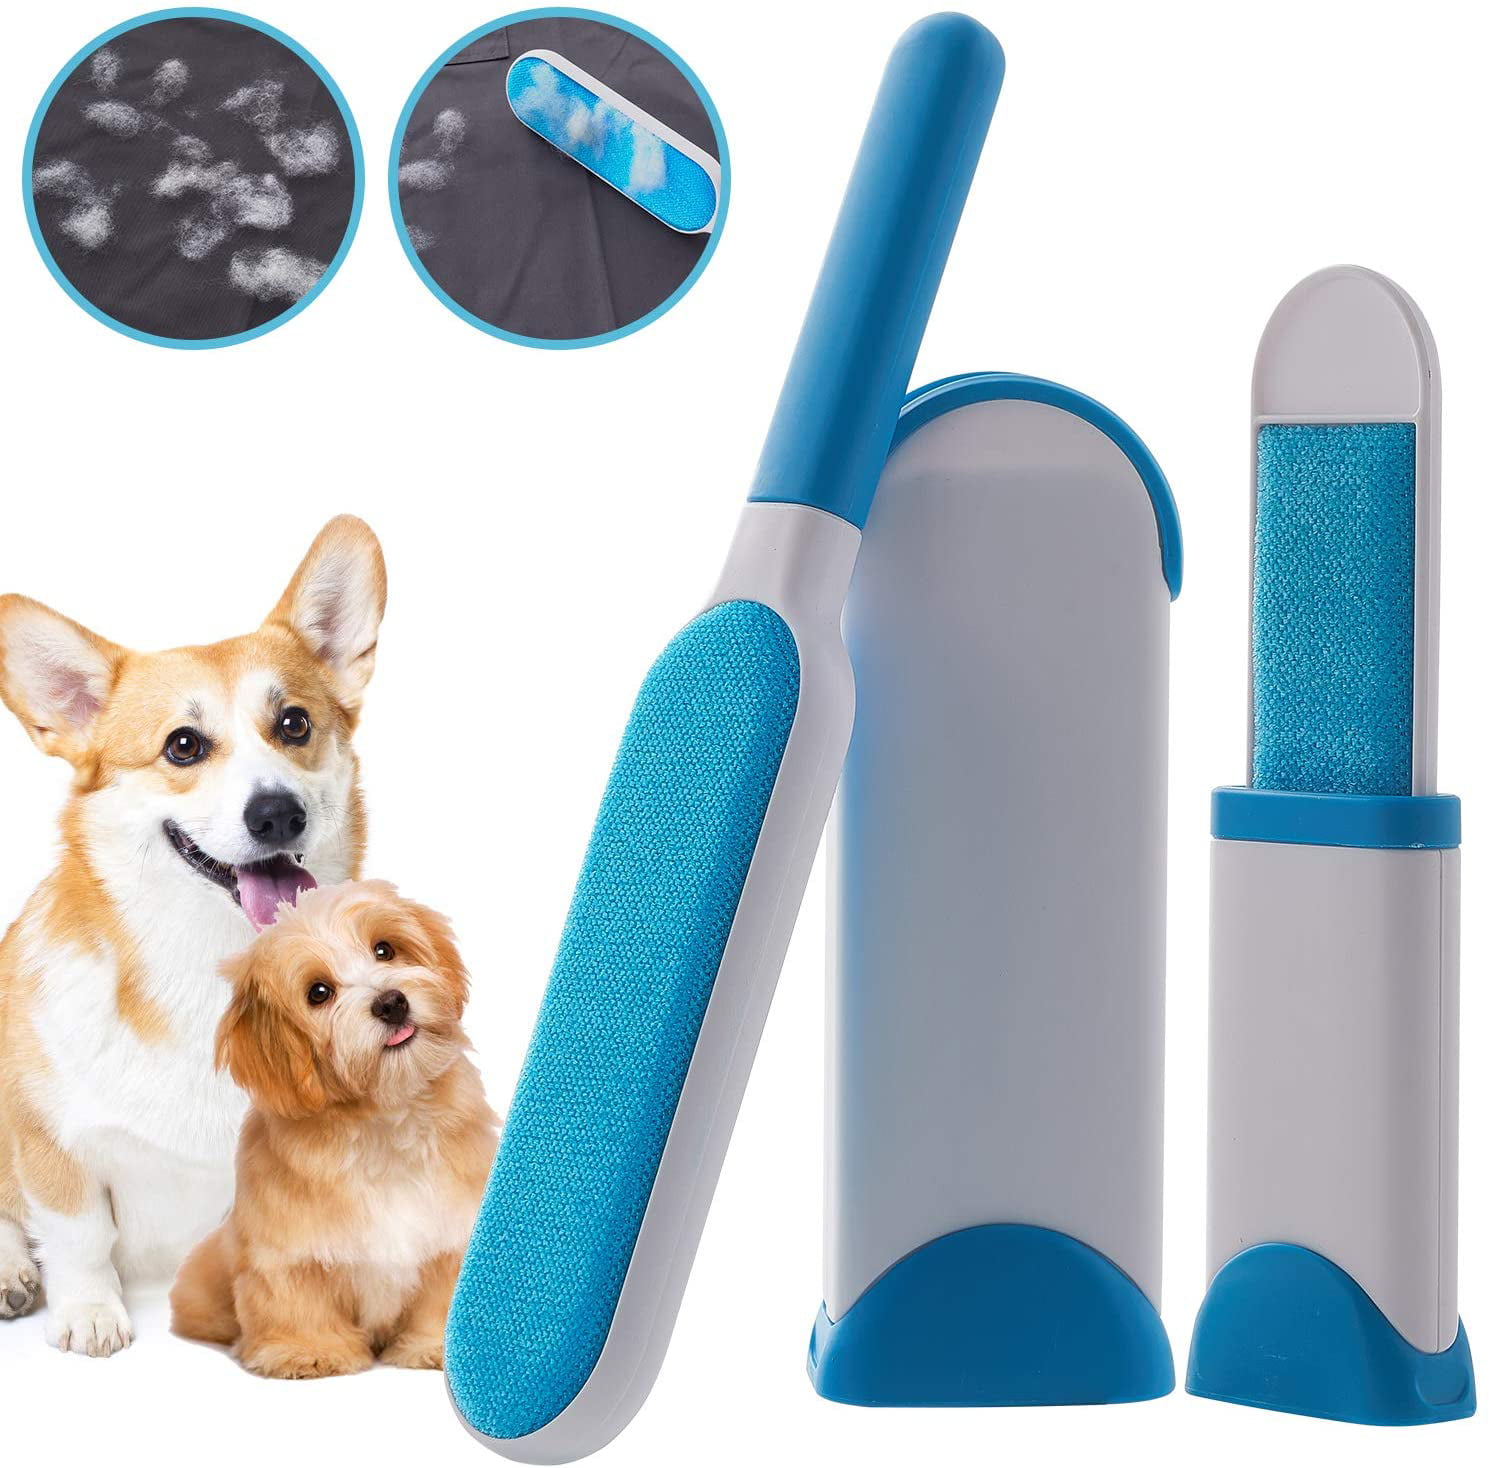 2 Sided Lint Roller Cleaning Brush Pet Dog Hair Dust Fluff-Remover Clothes Q2Z8 